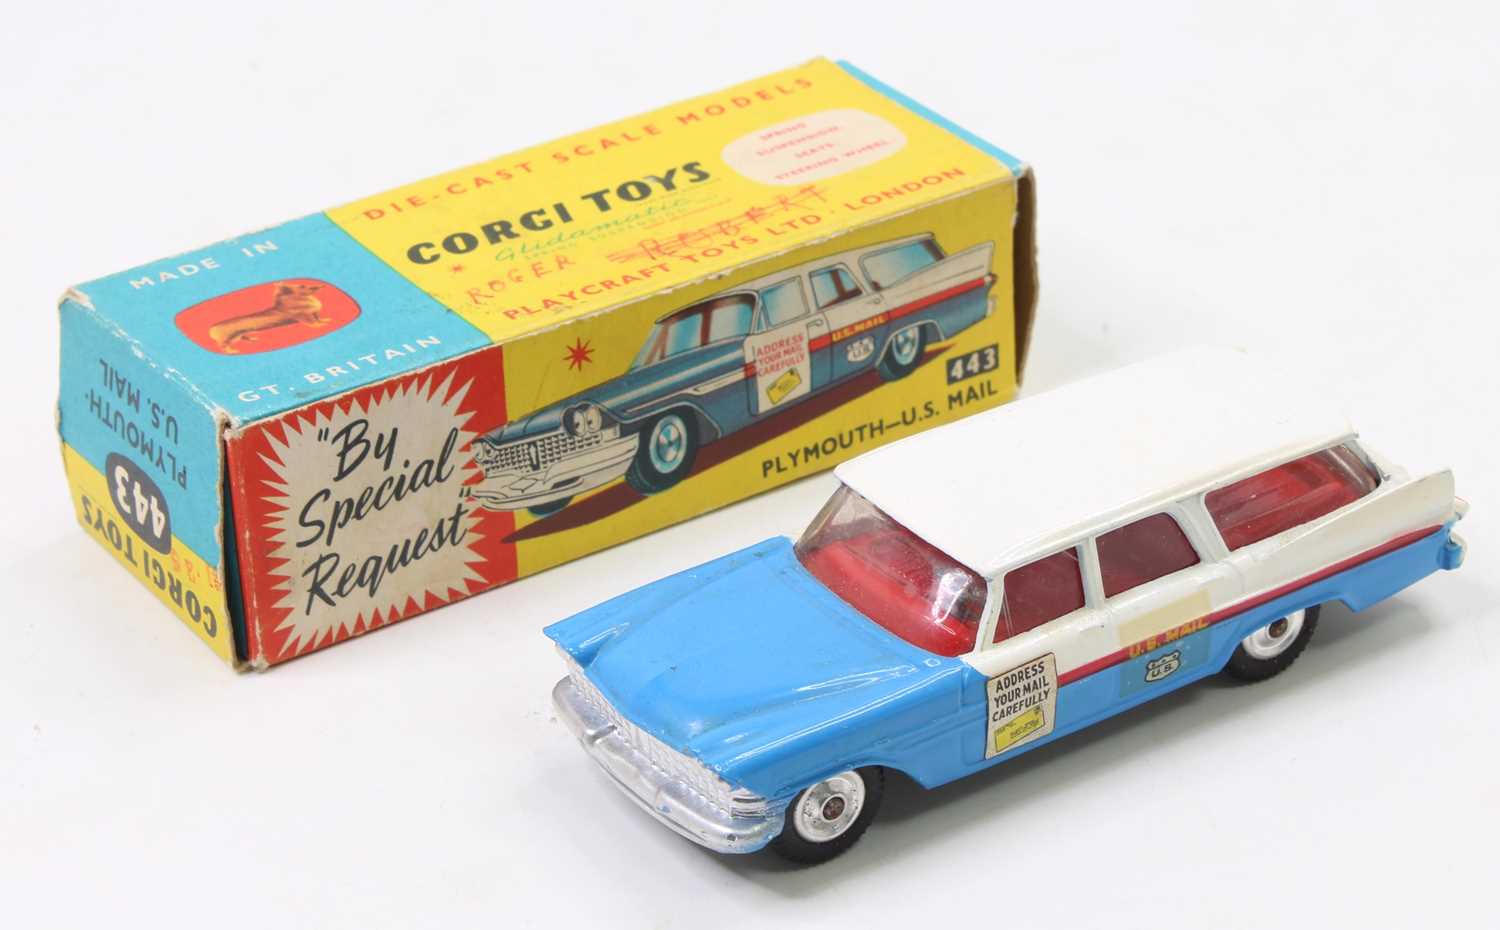 Corgi Toys No. 443 Plymouth US Mail car, white with mid-blue bonnet and red side flash, red interior